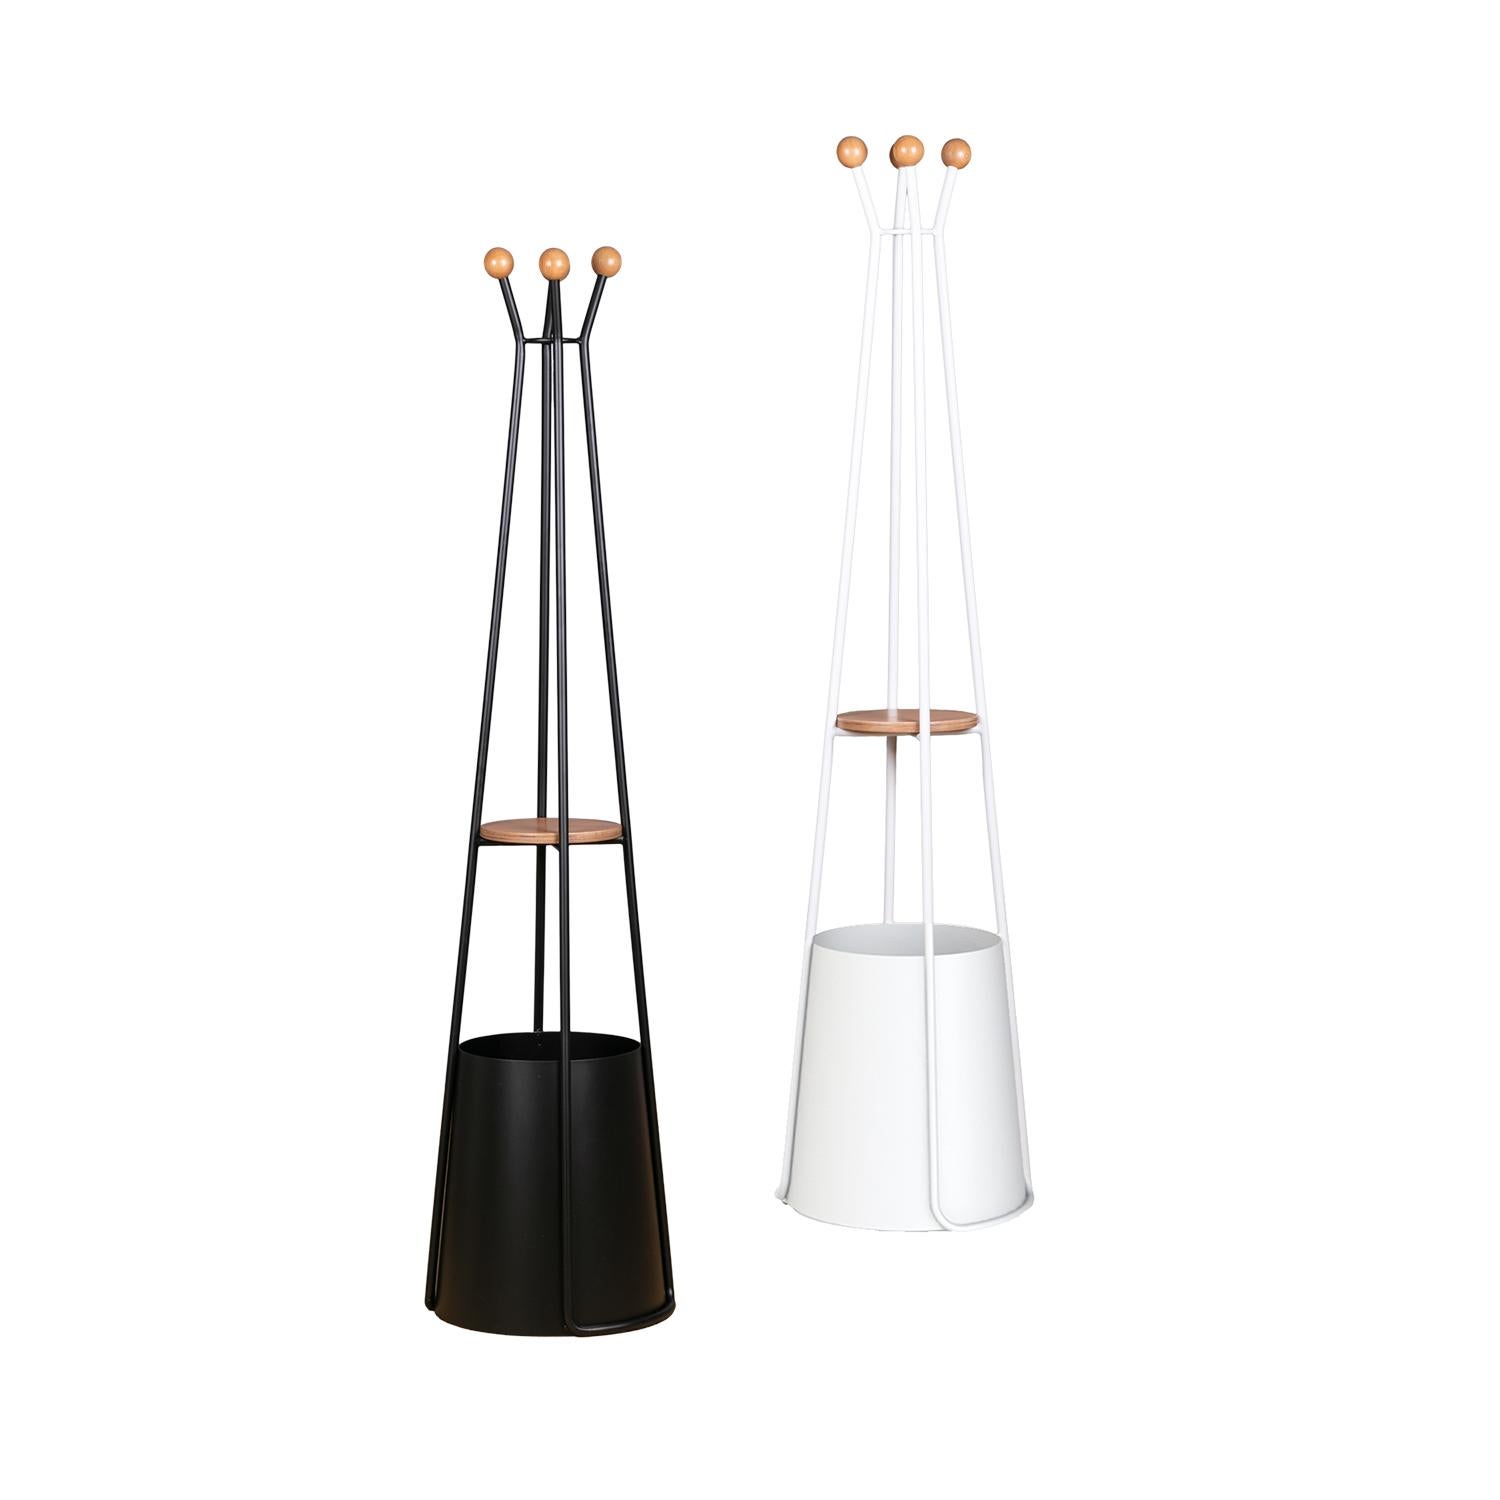 Sama coat rack is part of the Sama collection, which provides functionality through simple, yet striking and sculptural forms that add a unique and elegant touch to its environment.

Inspired by the poetry of whirling costumes worn in Sama